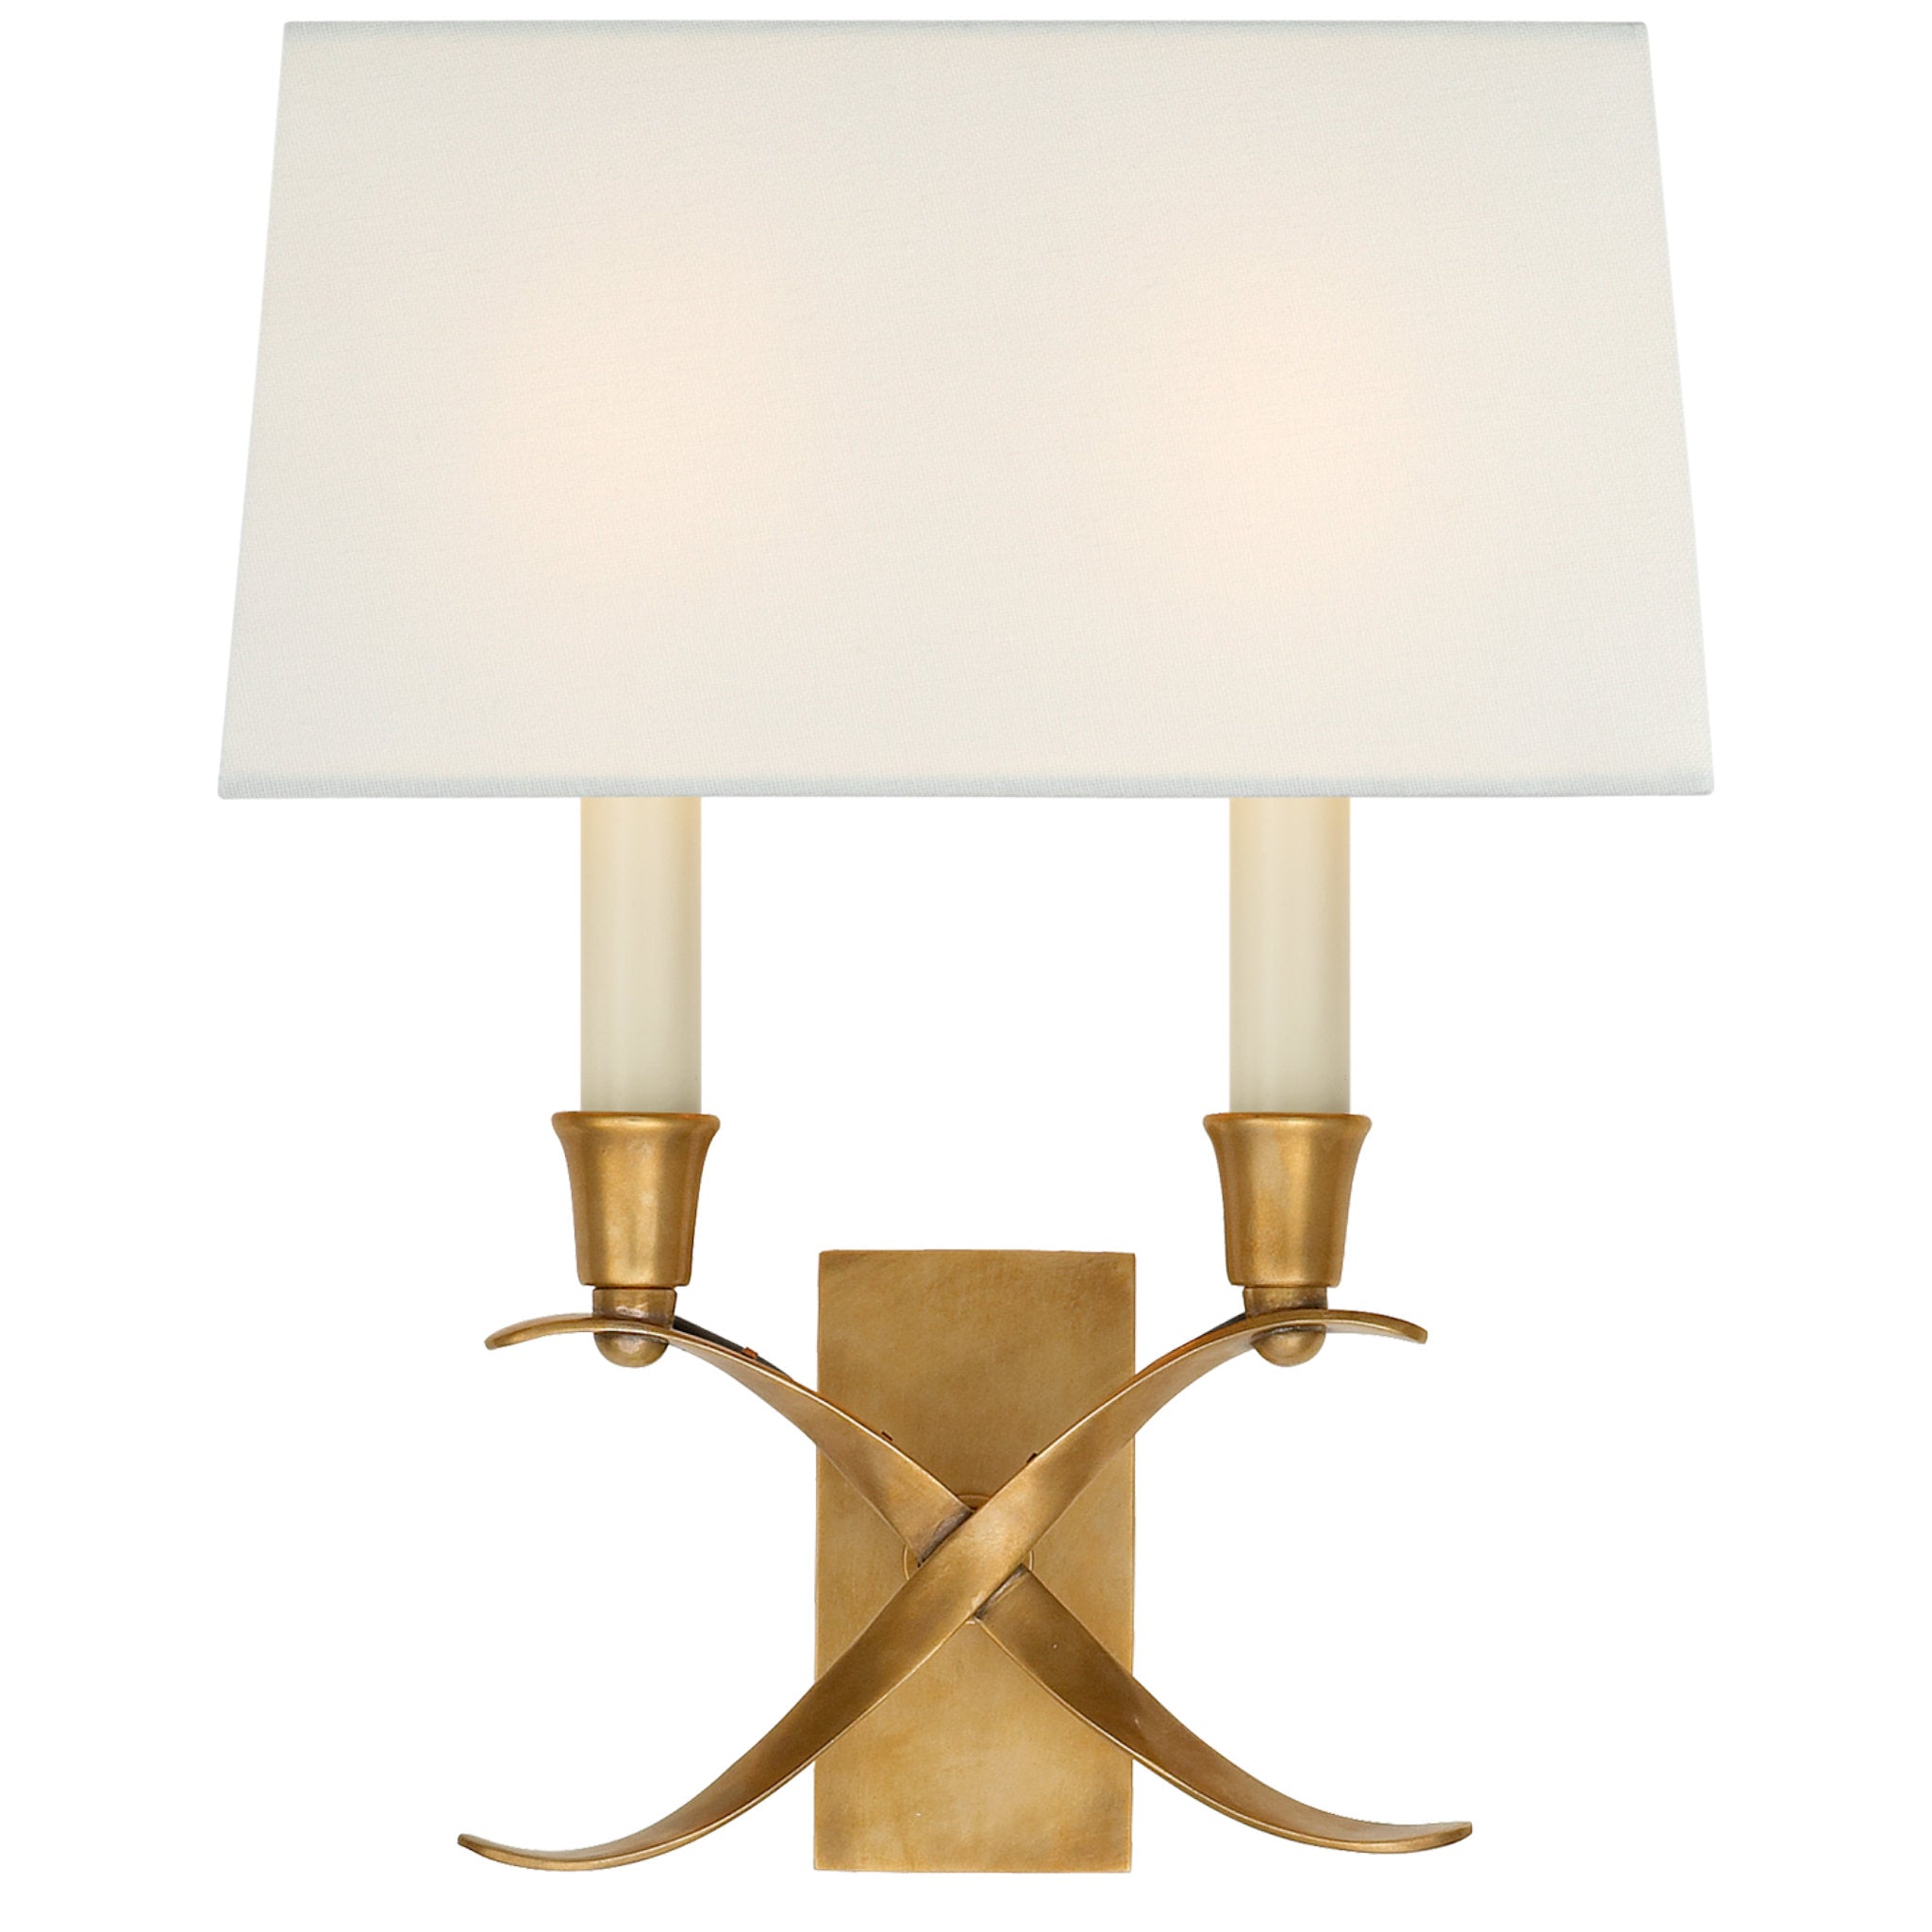 Chapman & Myers Cross Bouillotte Small Sconce in Antique-Burnished Brass with Linen Shade